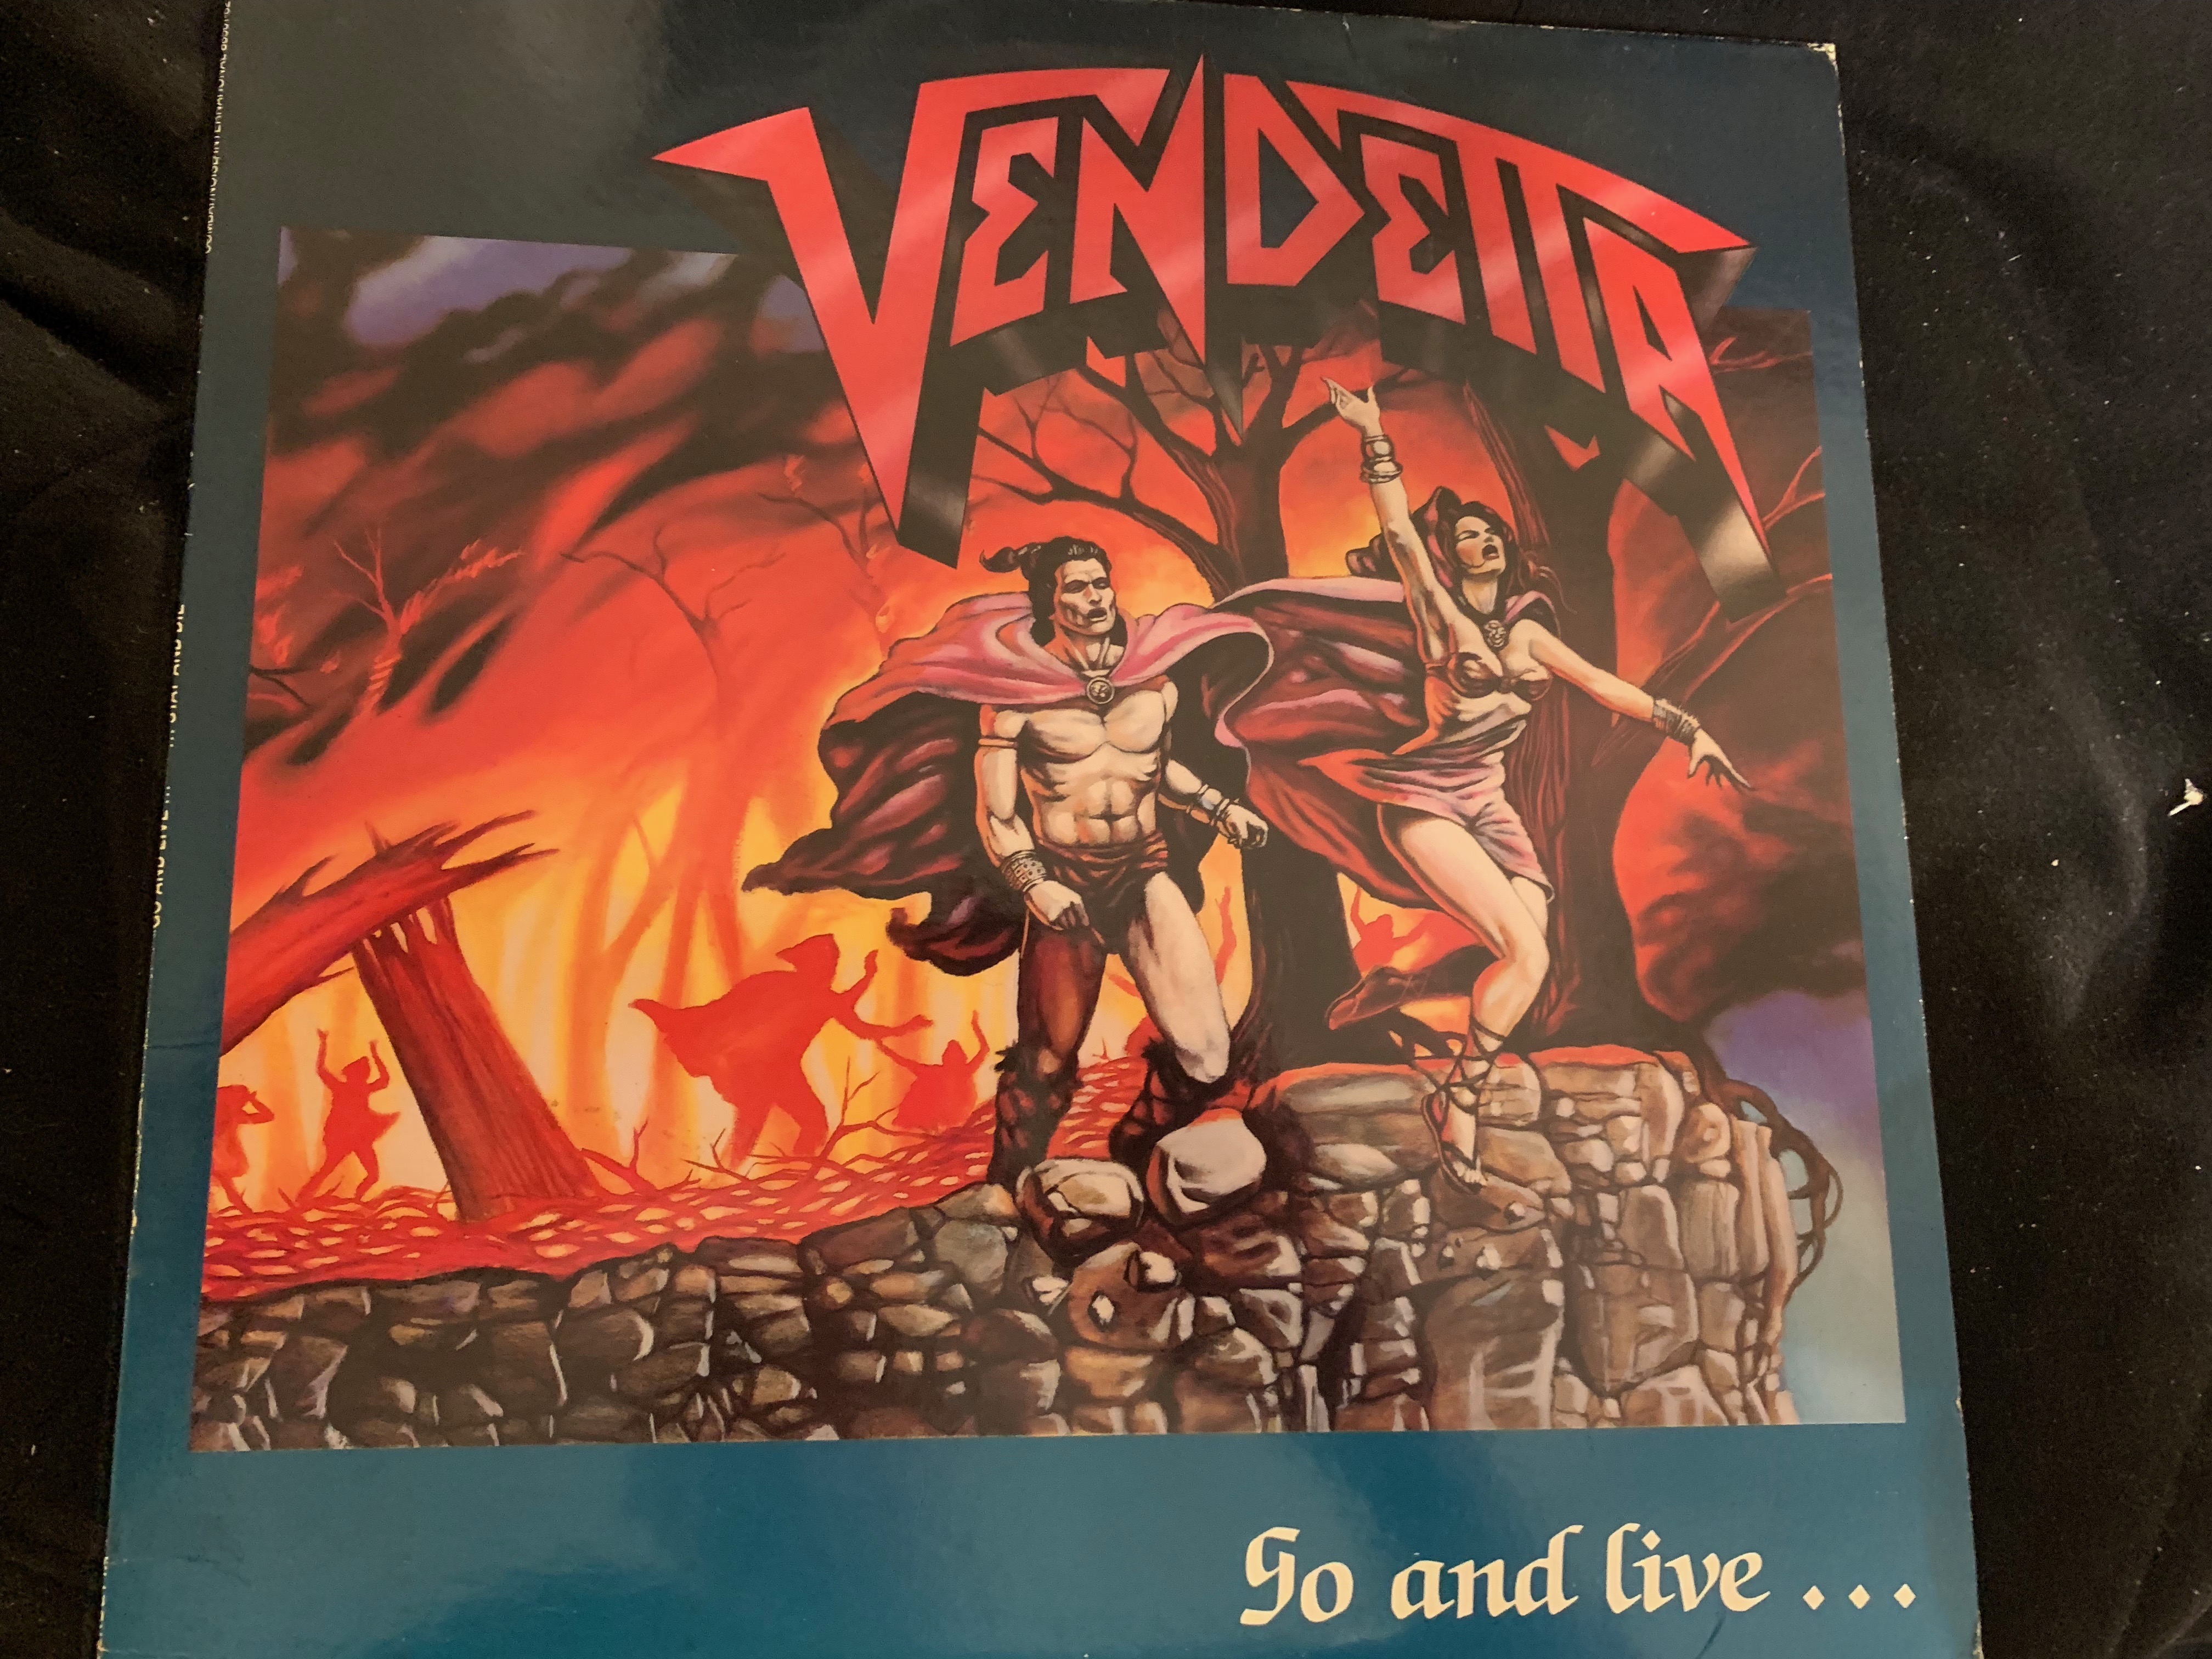 VENDETTA "Go and Live…Stay and Die!" 1987 - German Thrash Band